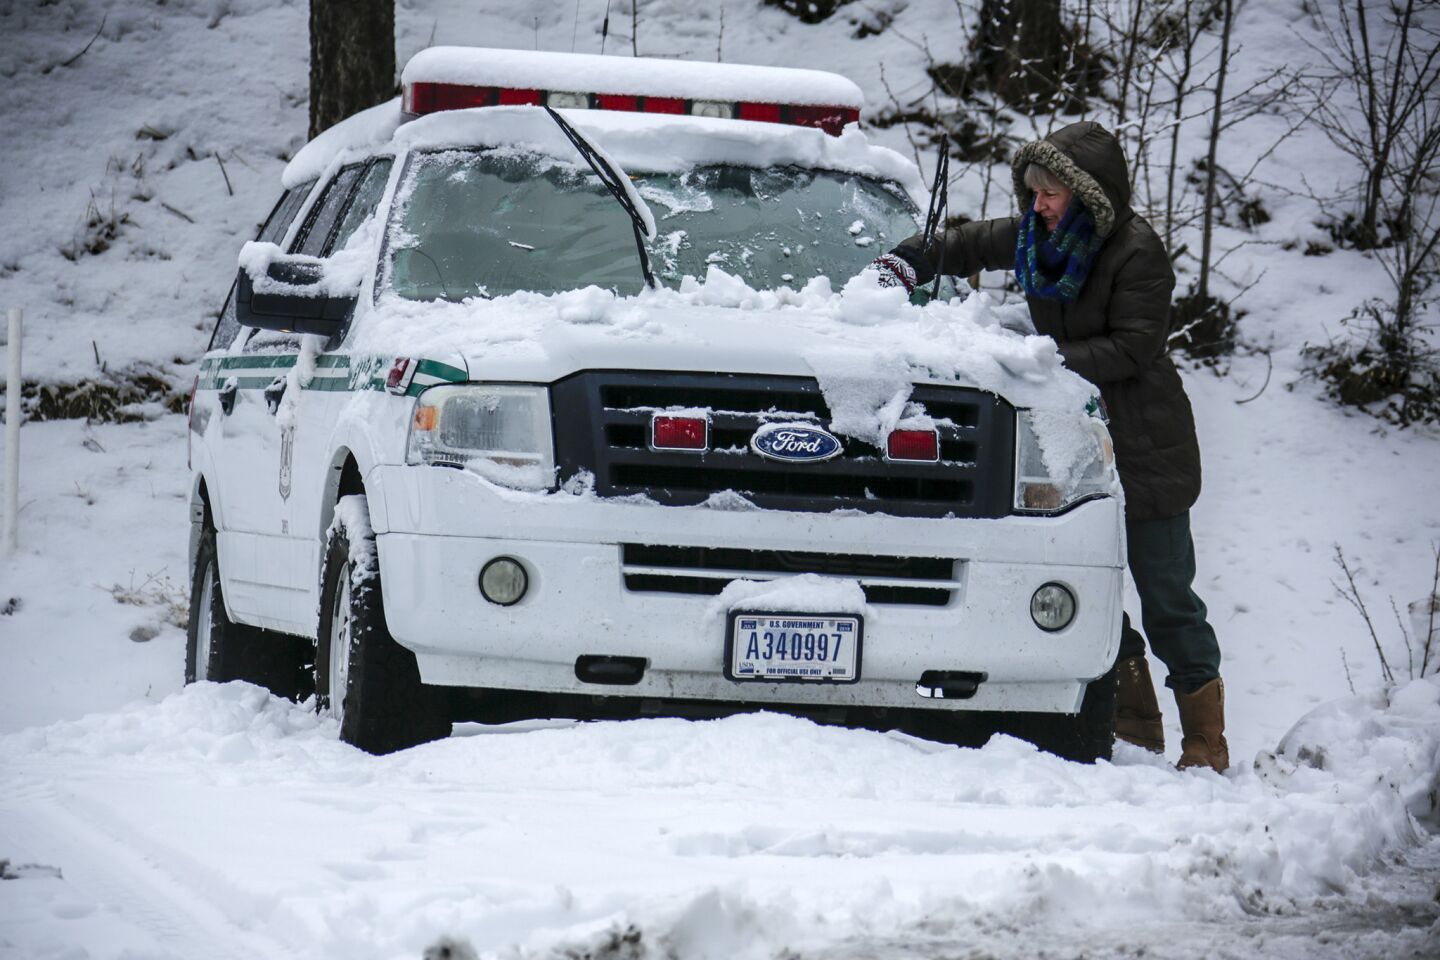 Diane Travis of Angeles Forest service removes snow from her vehicle above Wrightwood at Mountain High.